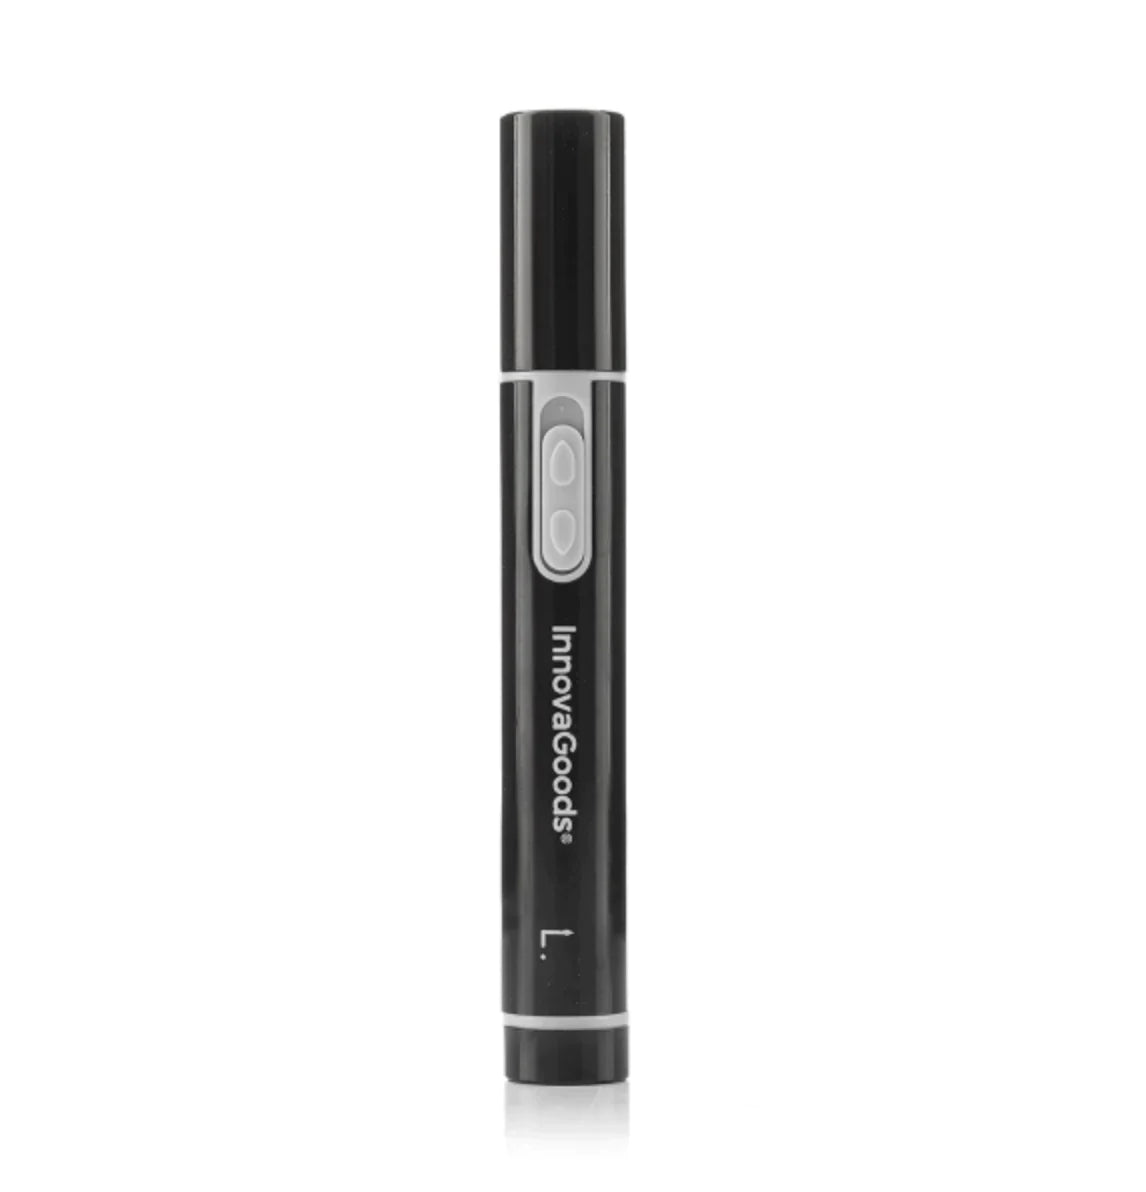 Smart nose and ear hair trimmer